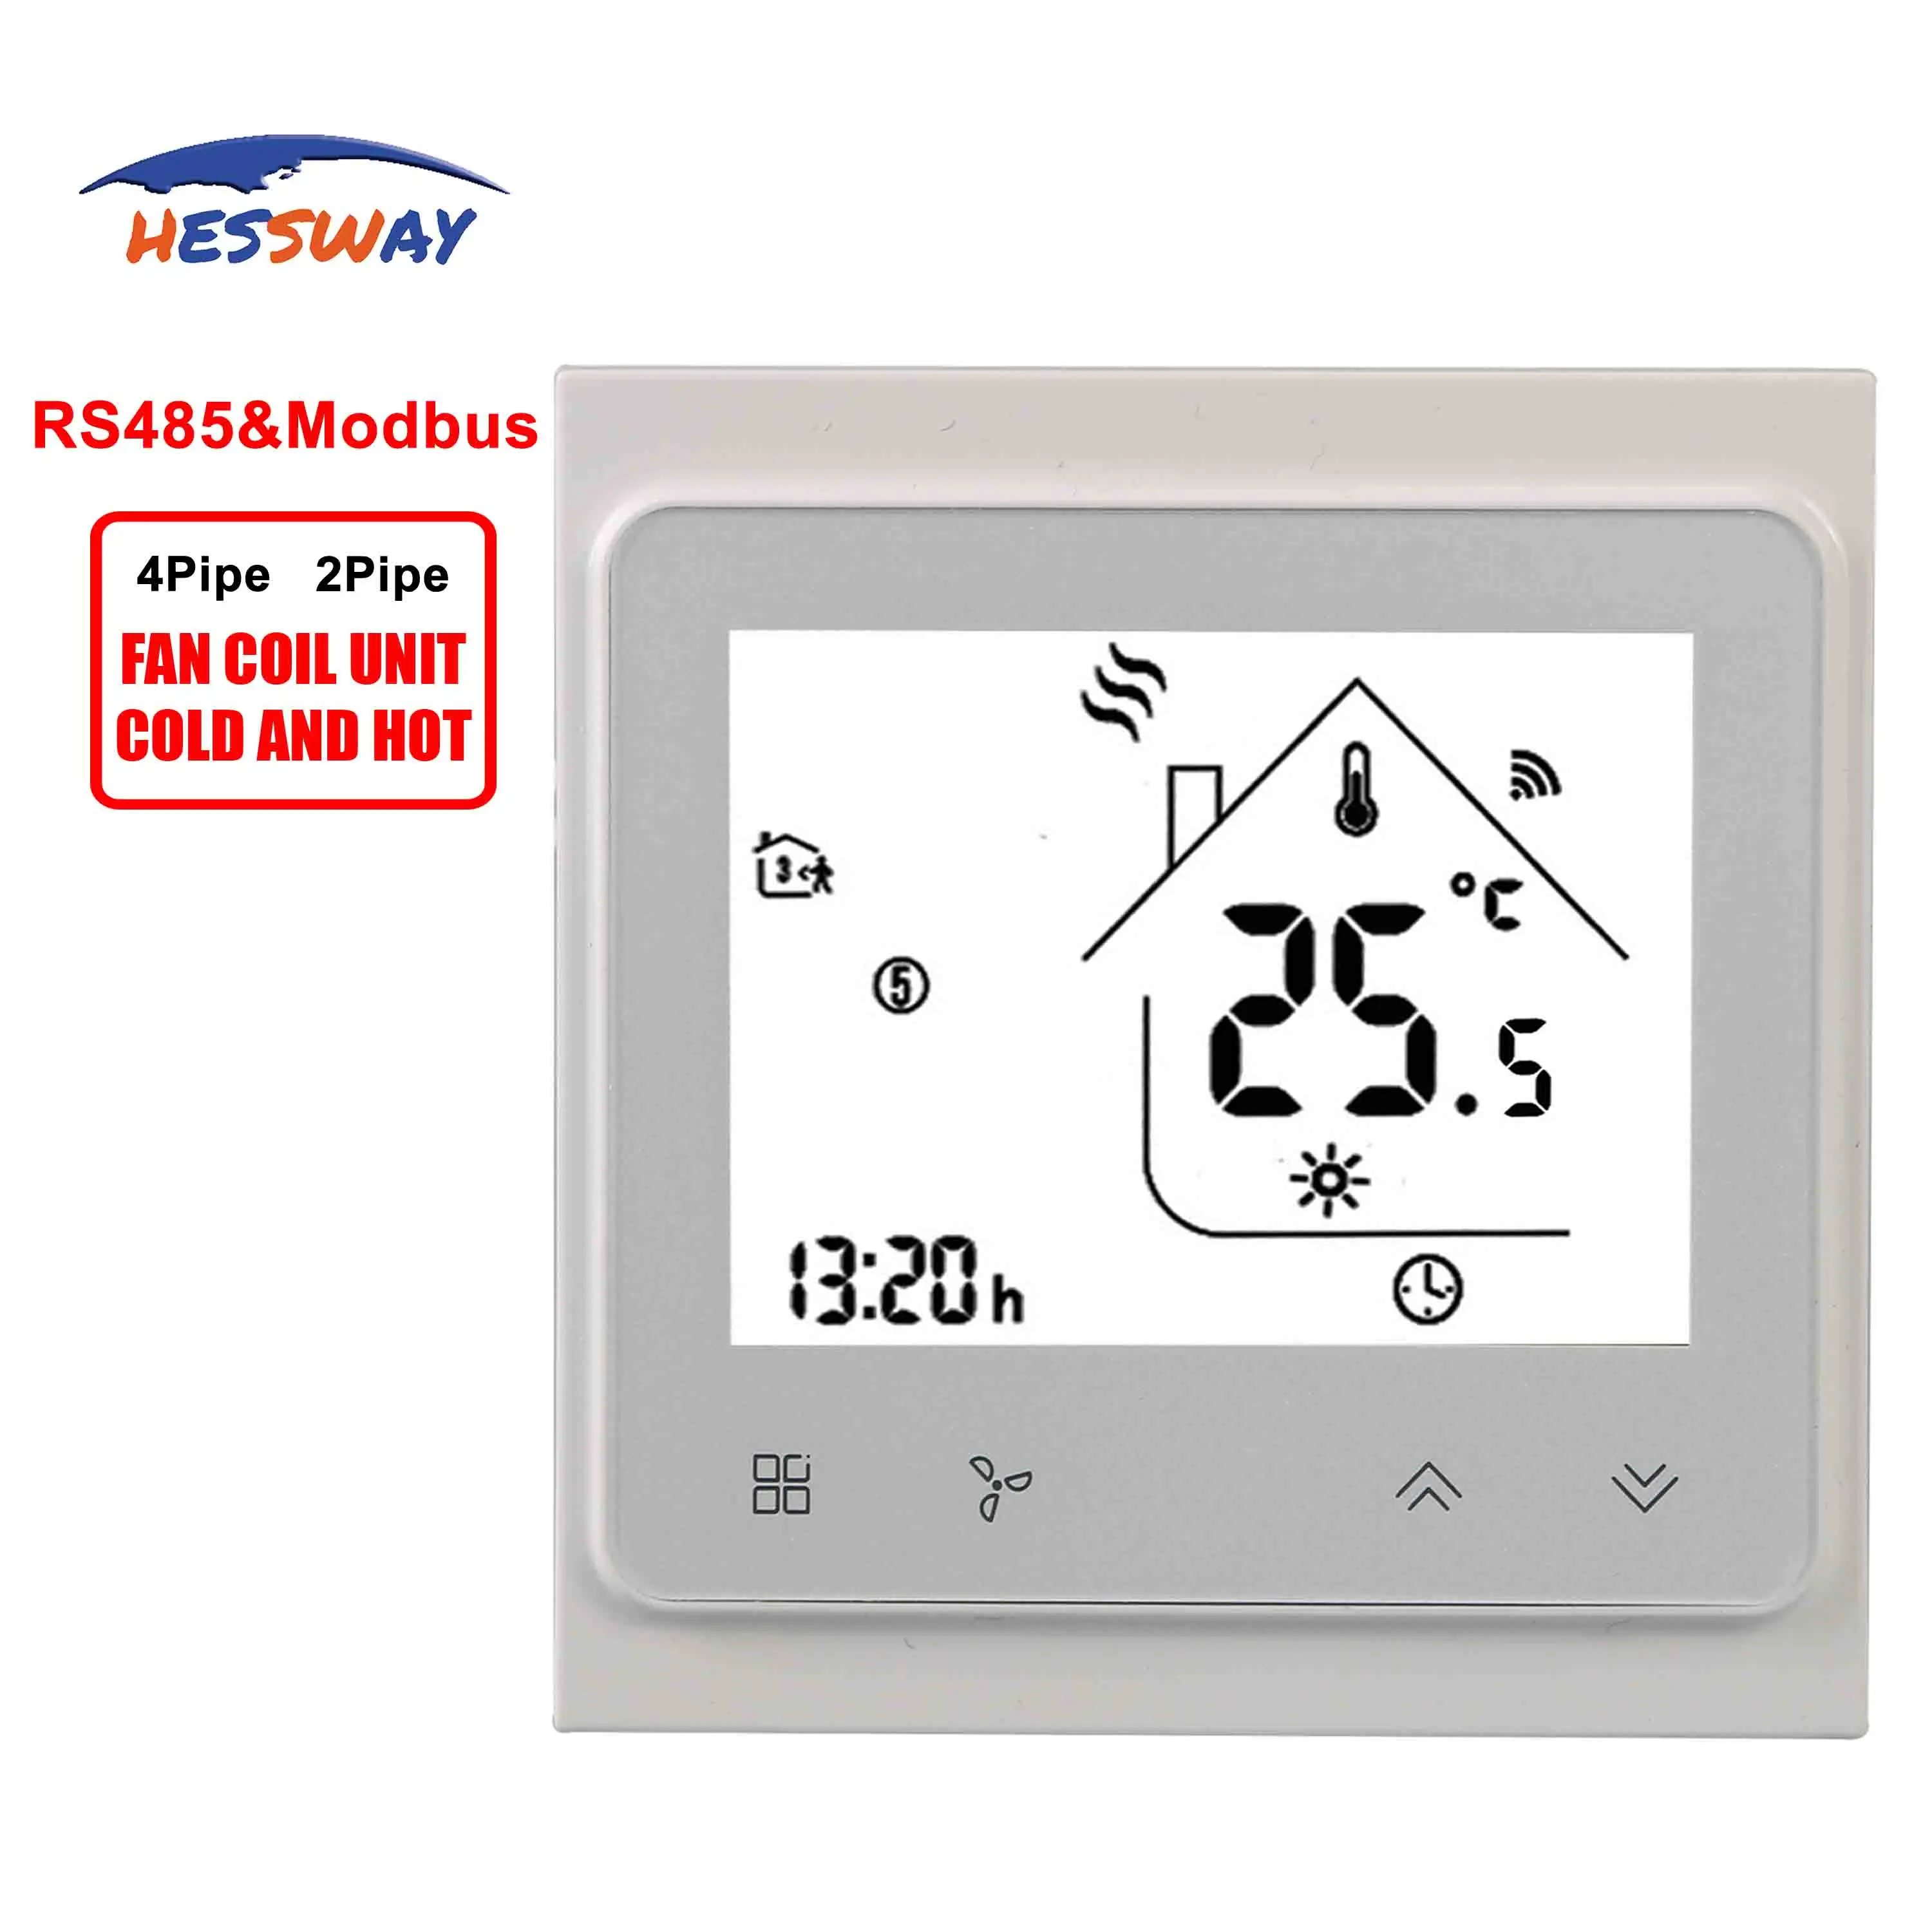 

HESSWAY Remote Terminal Unit RS485/MODBUS thermostat 24v for 2pipe 4pipe heat cool temp